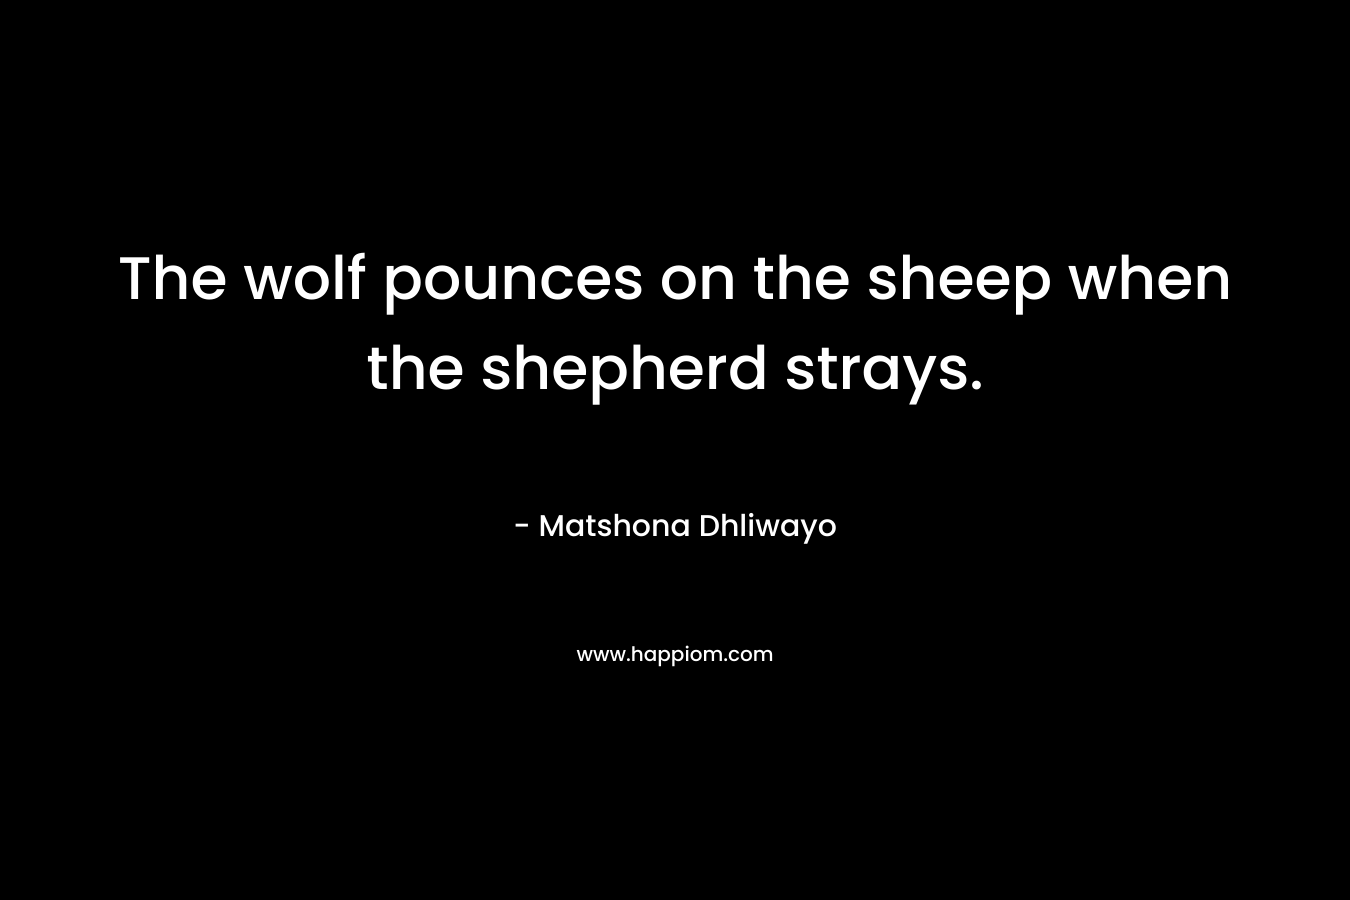 The wolf pounces on the sheep when the shepherd strays.